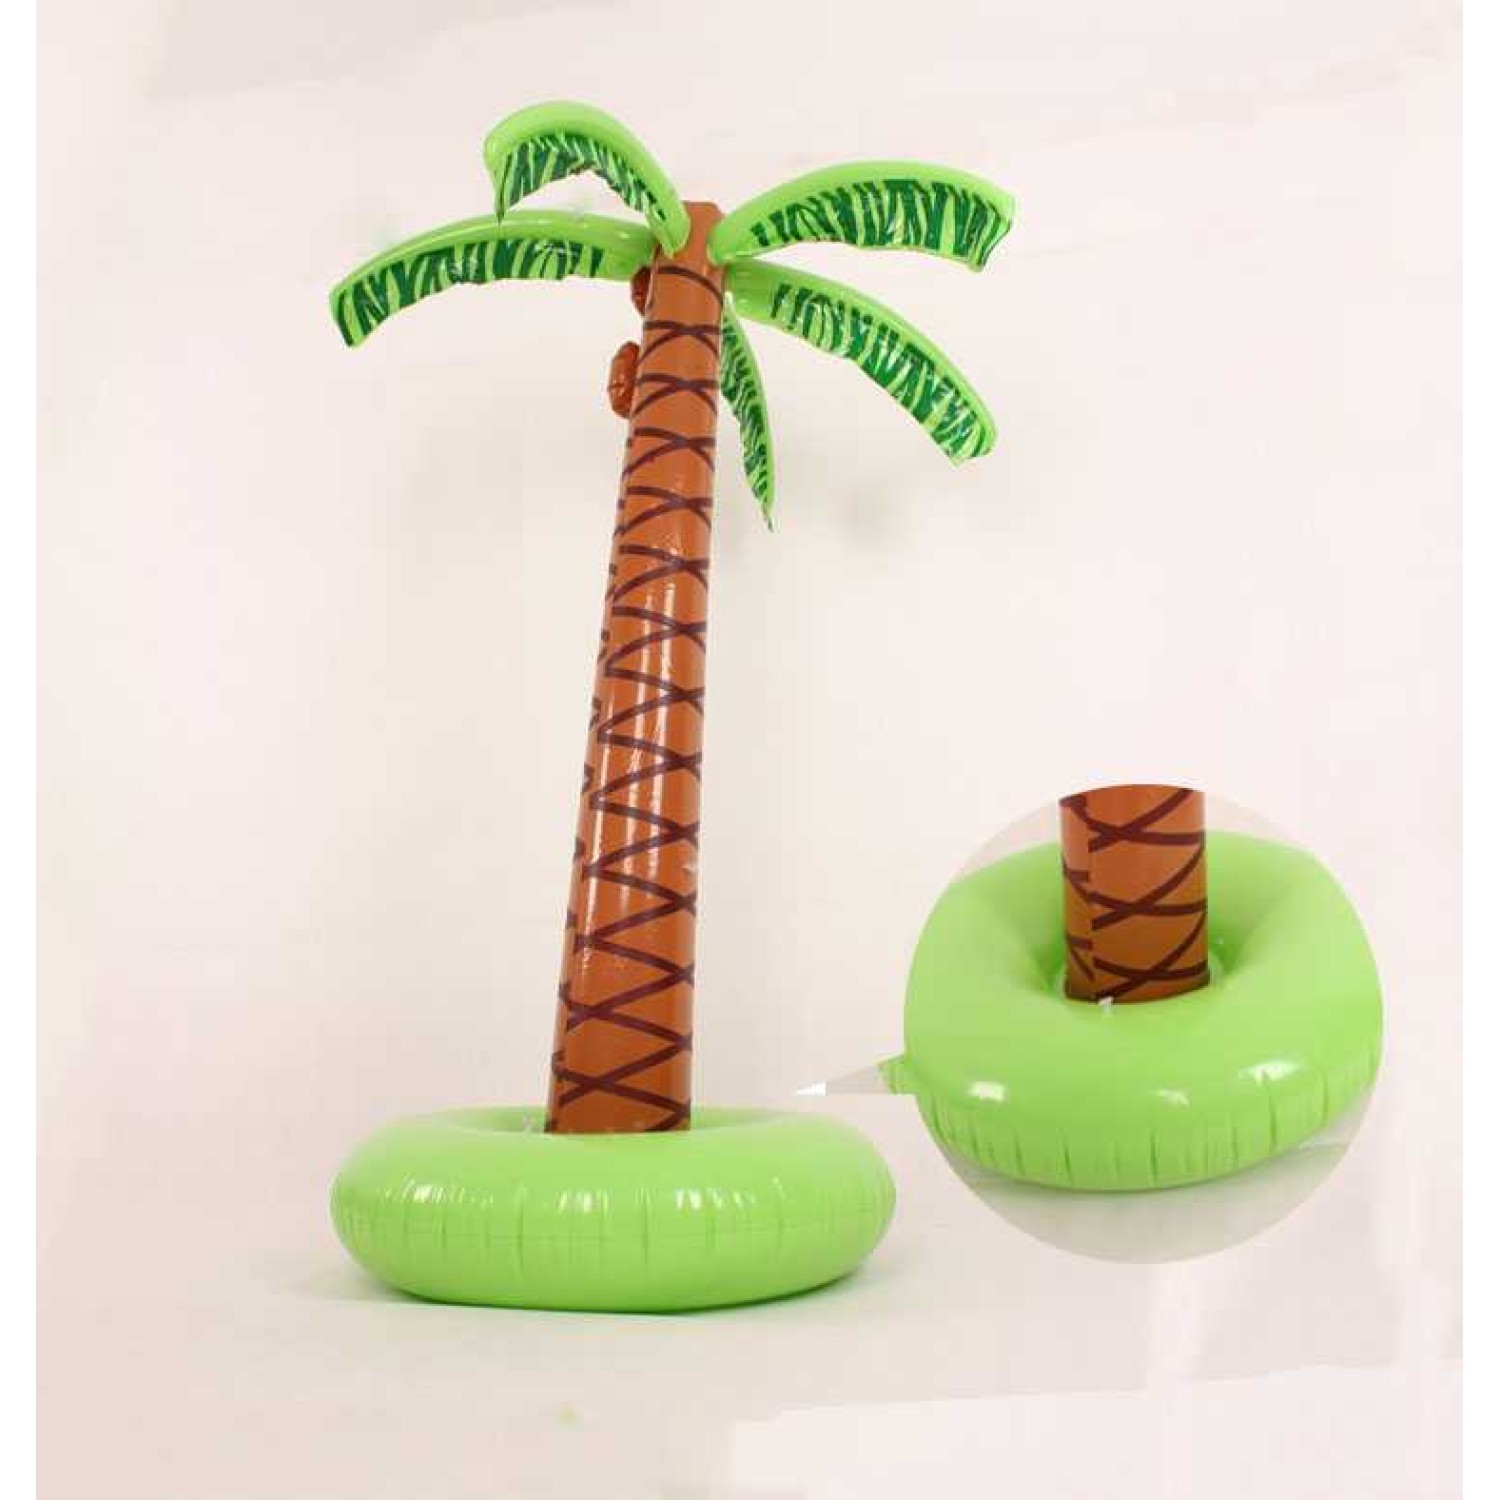 1 INFLATABLE PALM TREE 66" Tall Luau Party Decoration Coconut #AA15 Free Ship 